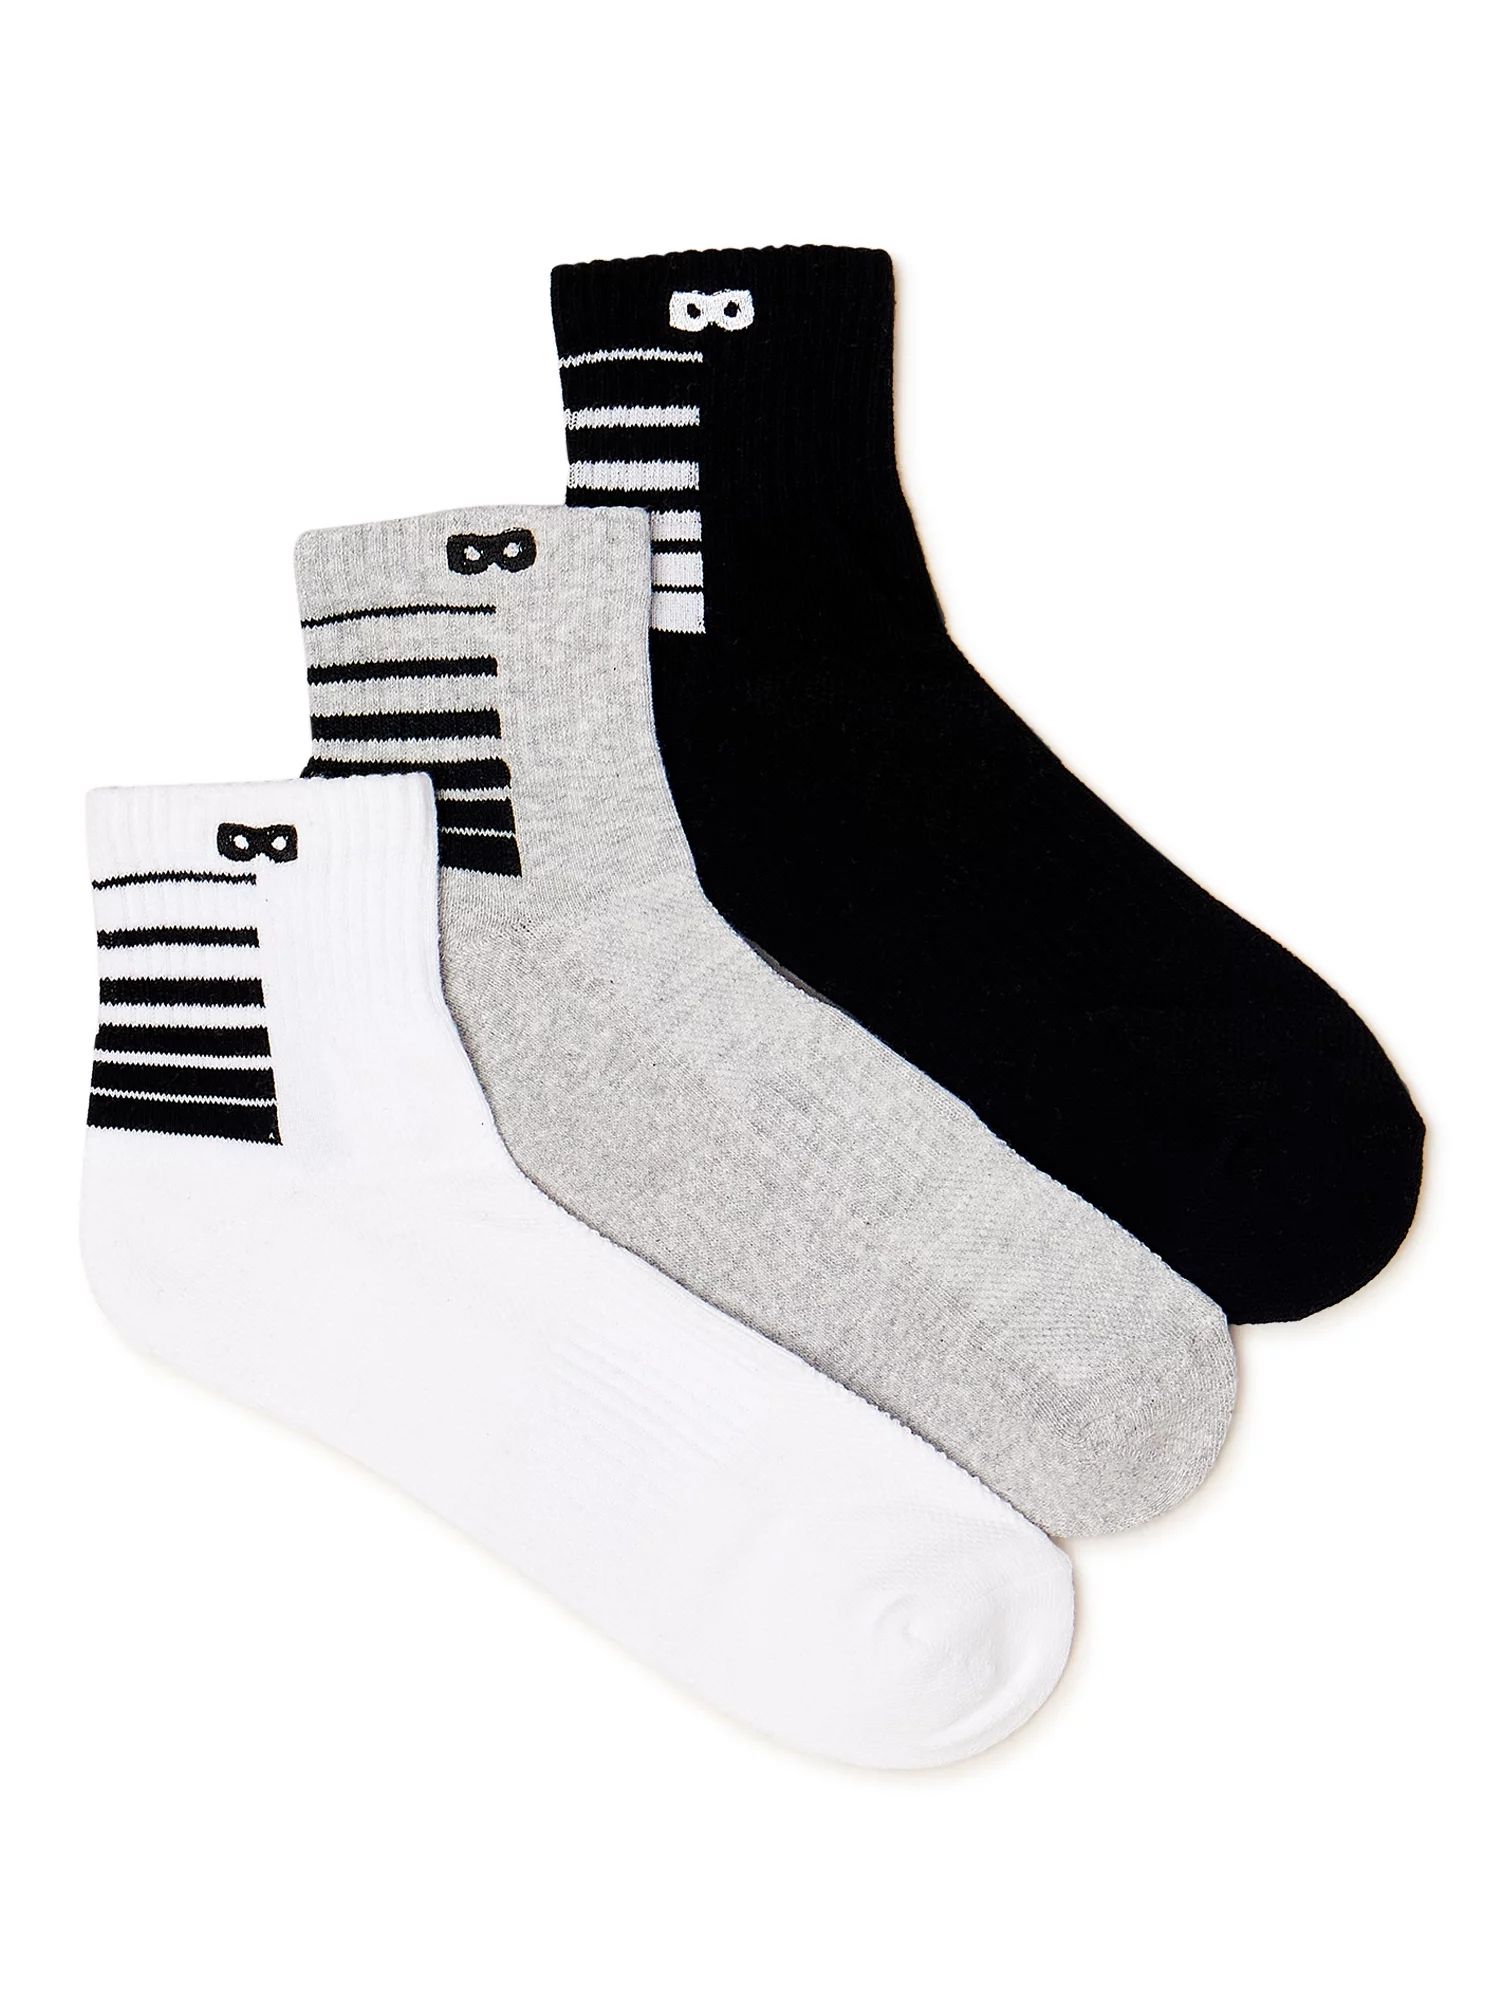 Pair of Thieves Blackout/Whiteout Cushion Ankle Sock Men's 3-Pack | Walmart (US)